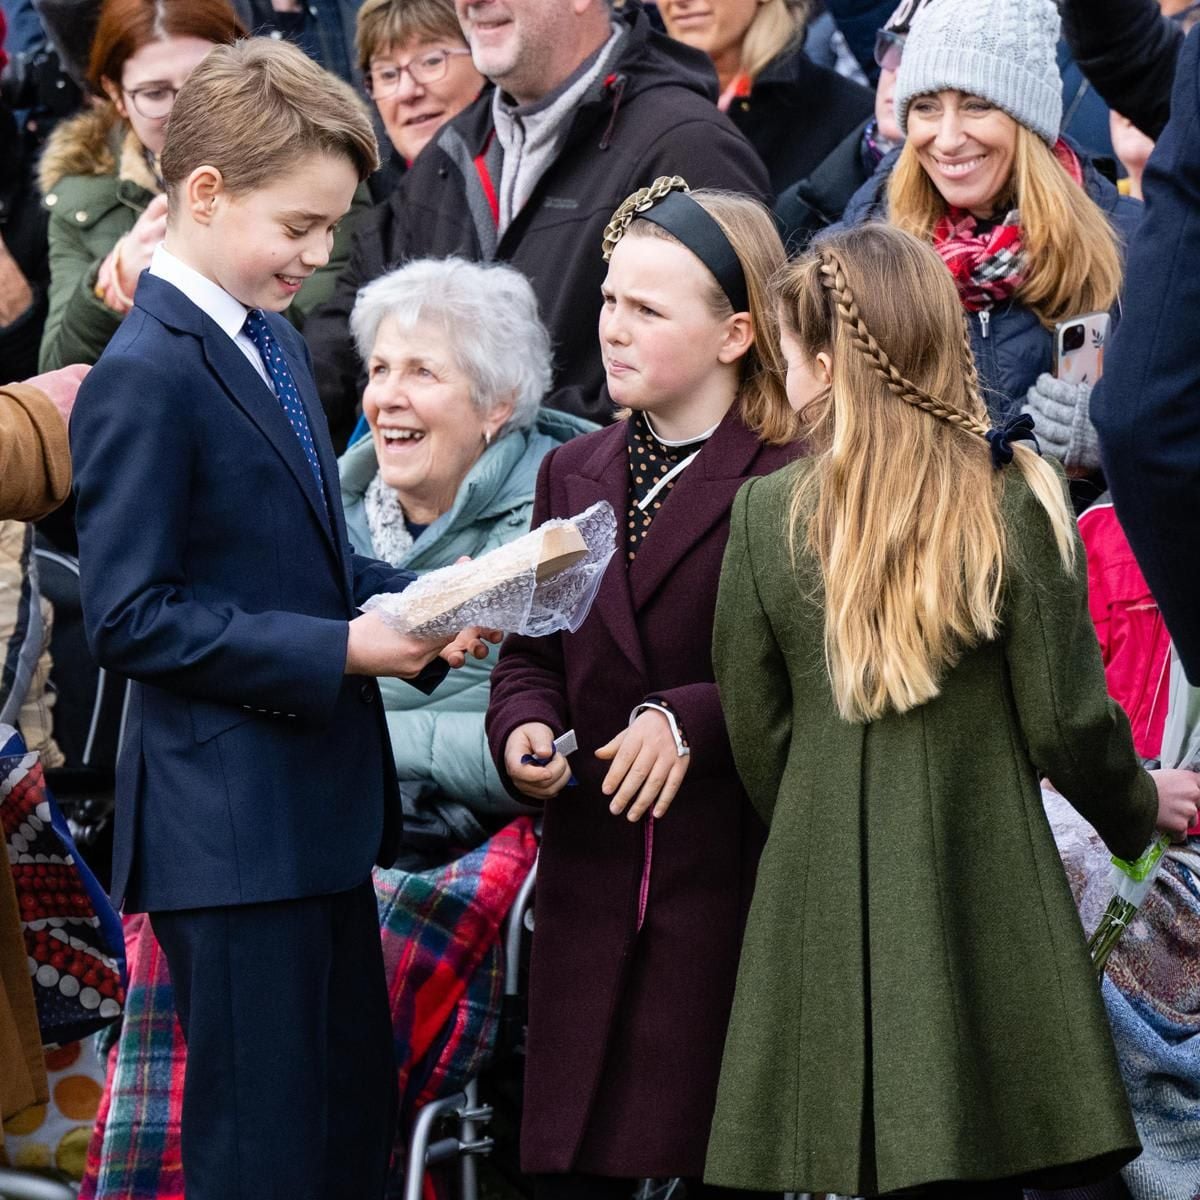 Prince George, as well as his siblings, received gifts from well-wishers on Christmas.